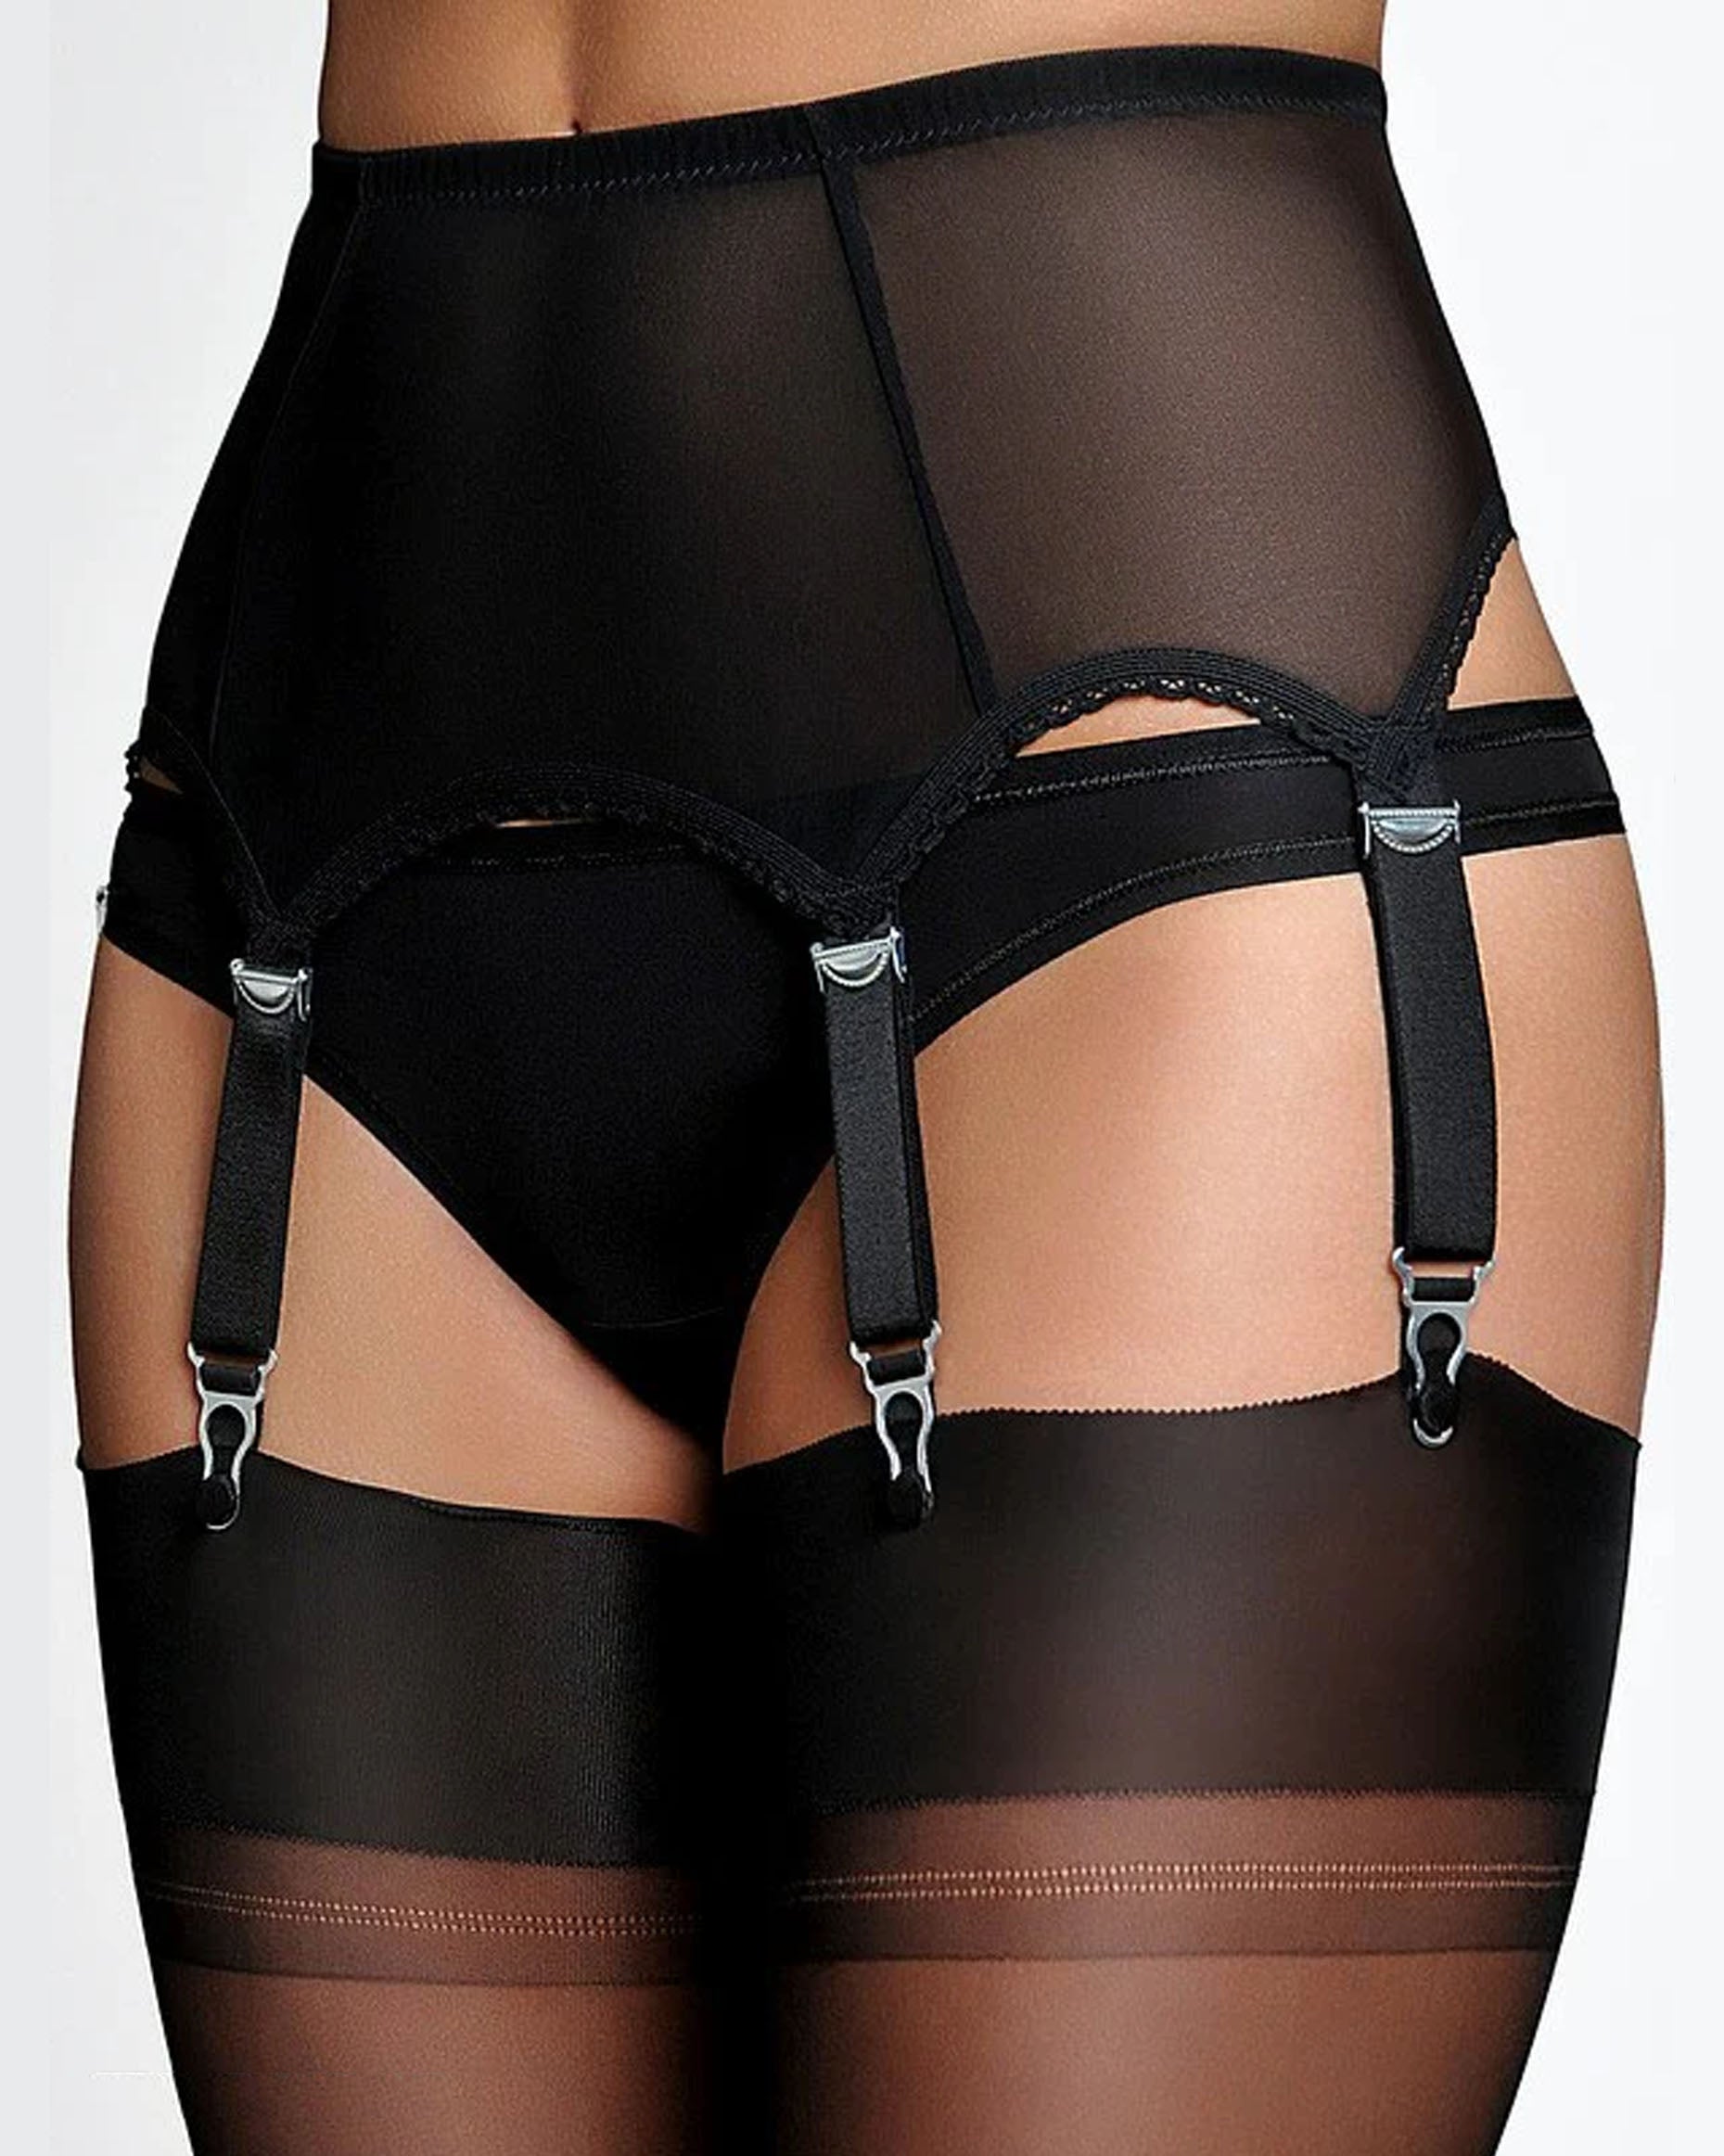 Classic black high waisted micro tulle suspender belt with thick straps and metal clasps, worn with sheer black stockings..